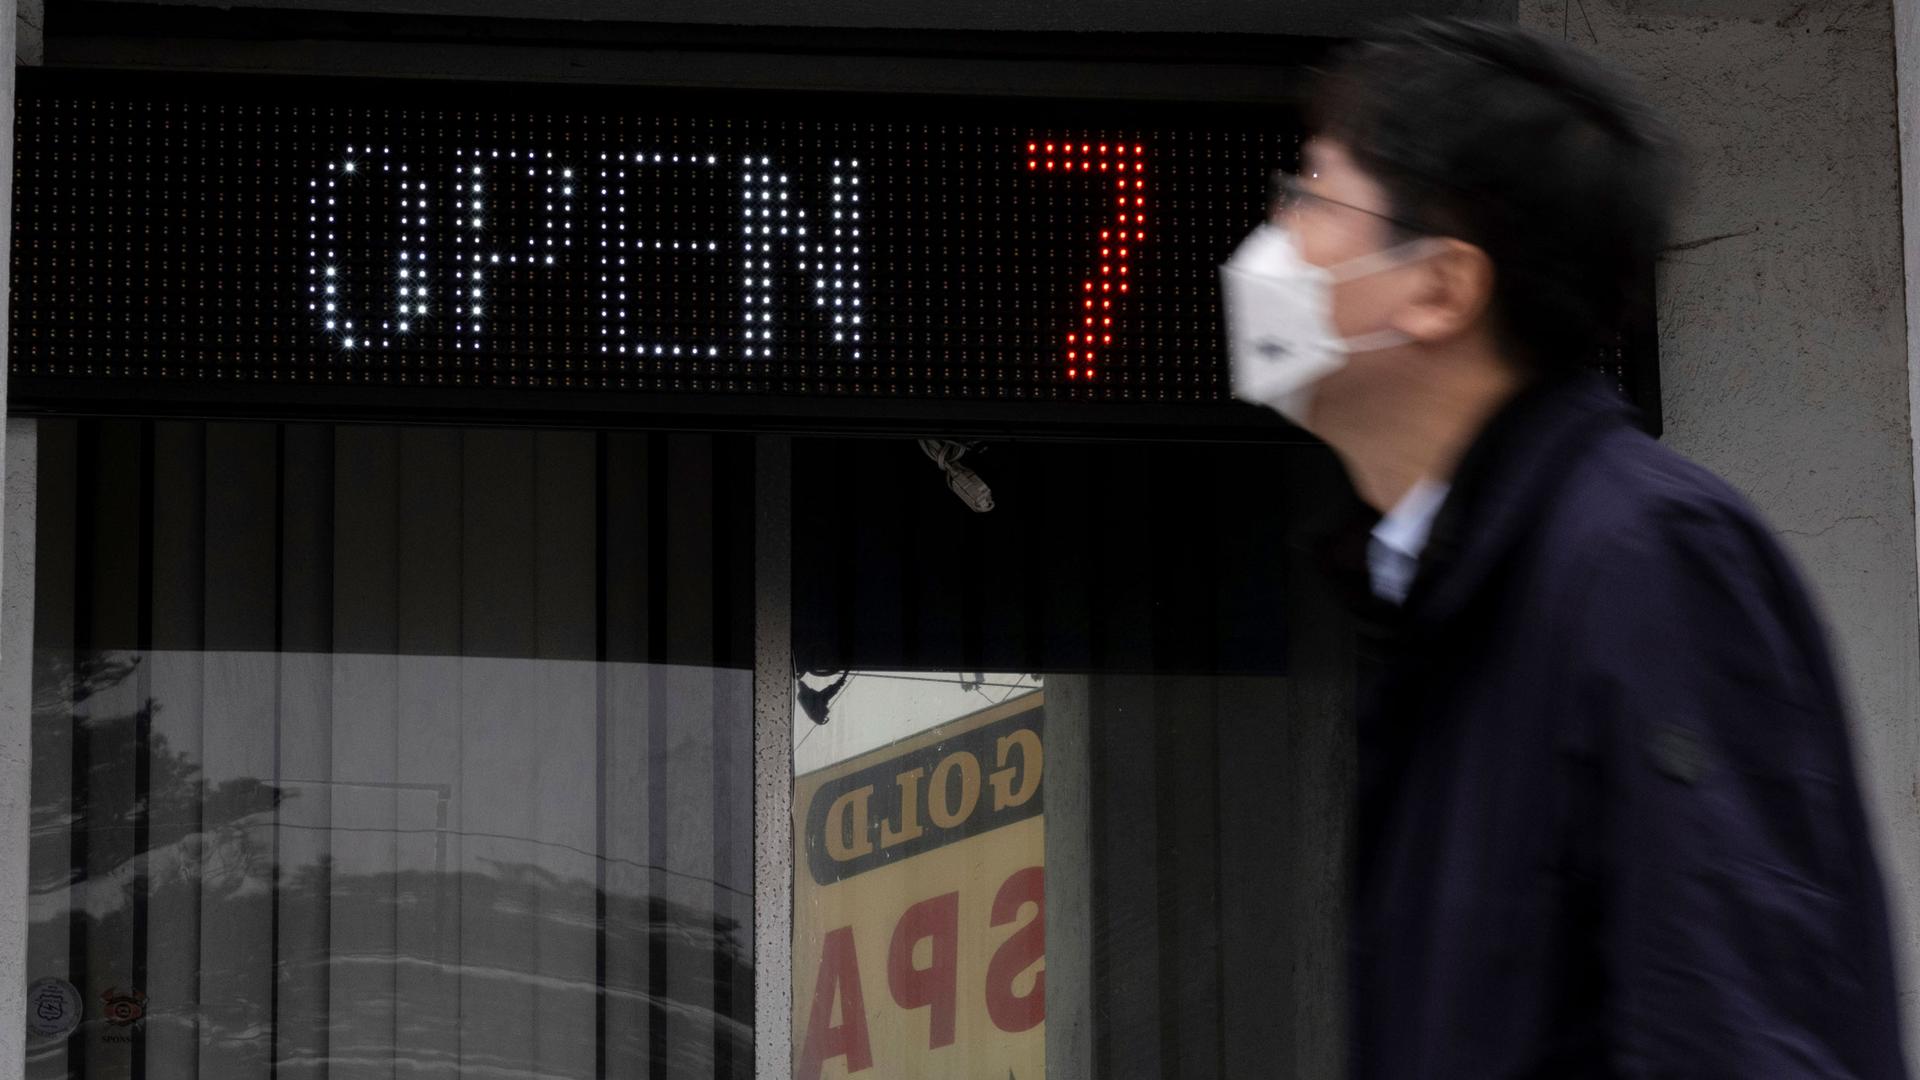 A man is shown in blurred focus walking past a digital sign that says, 'open 7' and glass beneth it with the sign for Gold Spa in the reflection.